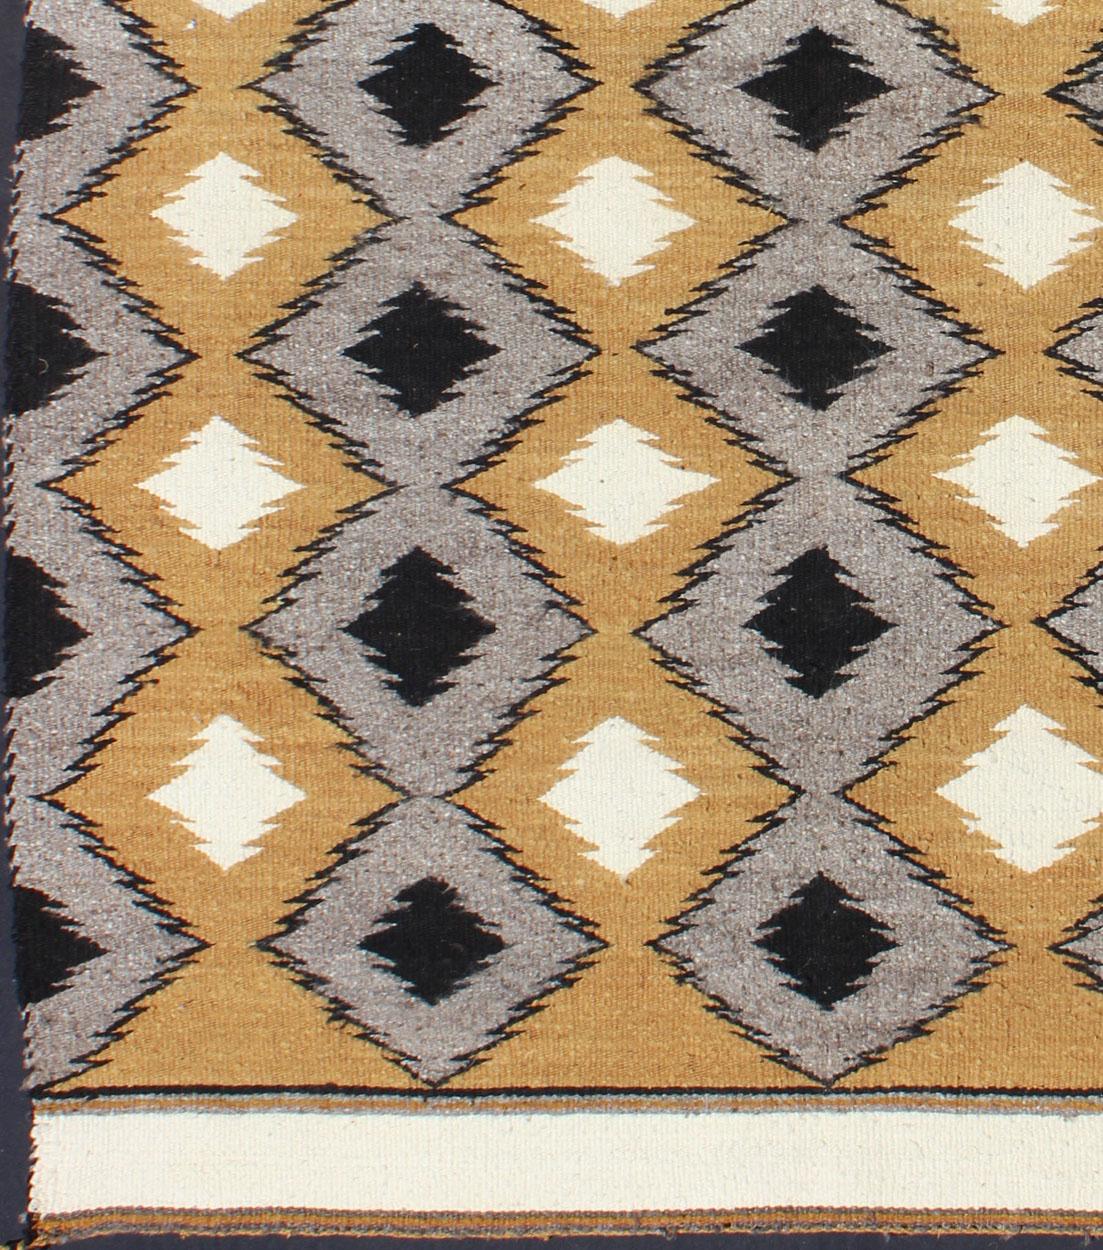 American Allover Tribal Navajo Kilim with Gold, Gray and Black For Sale